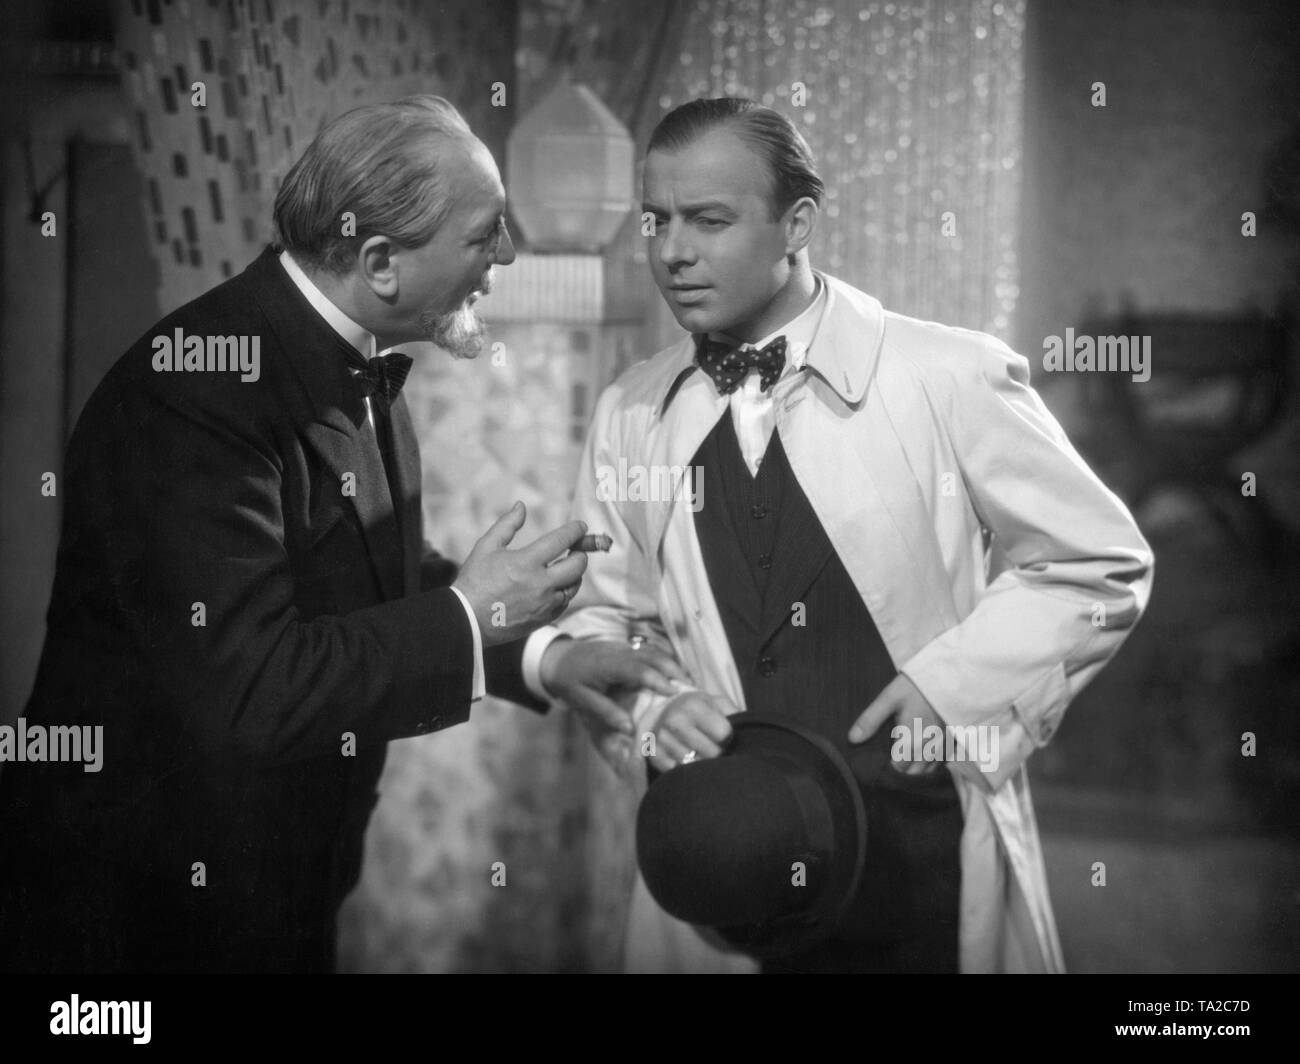 Heinz Ruehmann as waiter Karl Kramer (right), who aims high and Paul Bildt as privy councilor Donon in 'The Roundabouts of Handsome Karl' (German: Die Umwege des schoenen Karl), directed by Carl Froehlich. Stock Photo